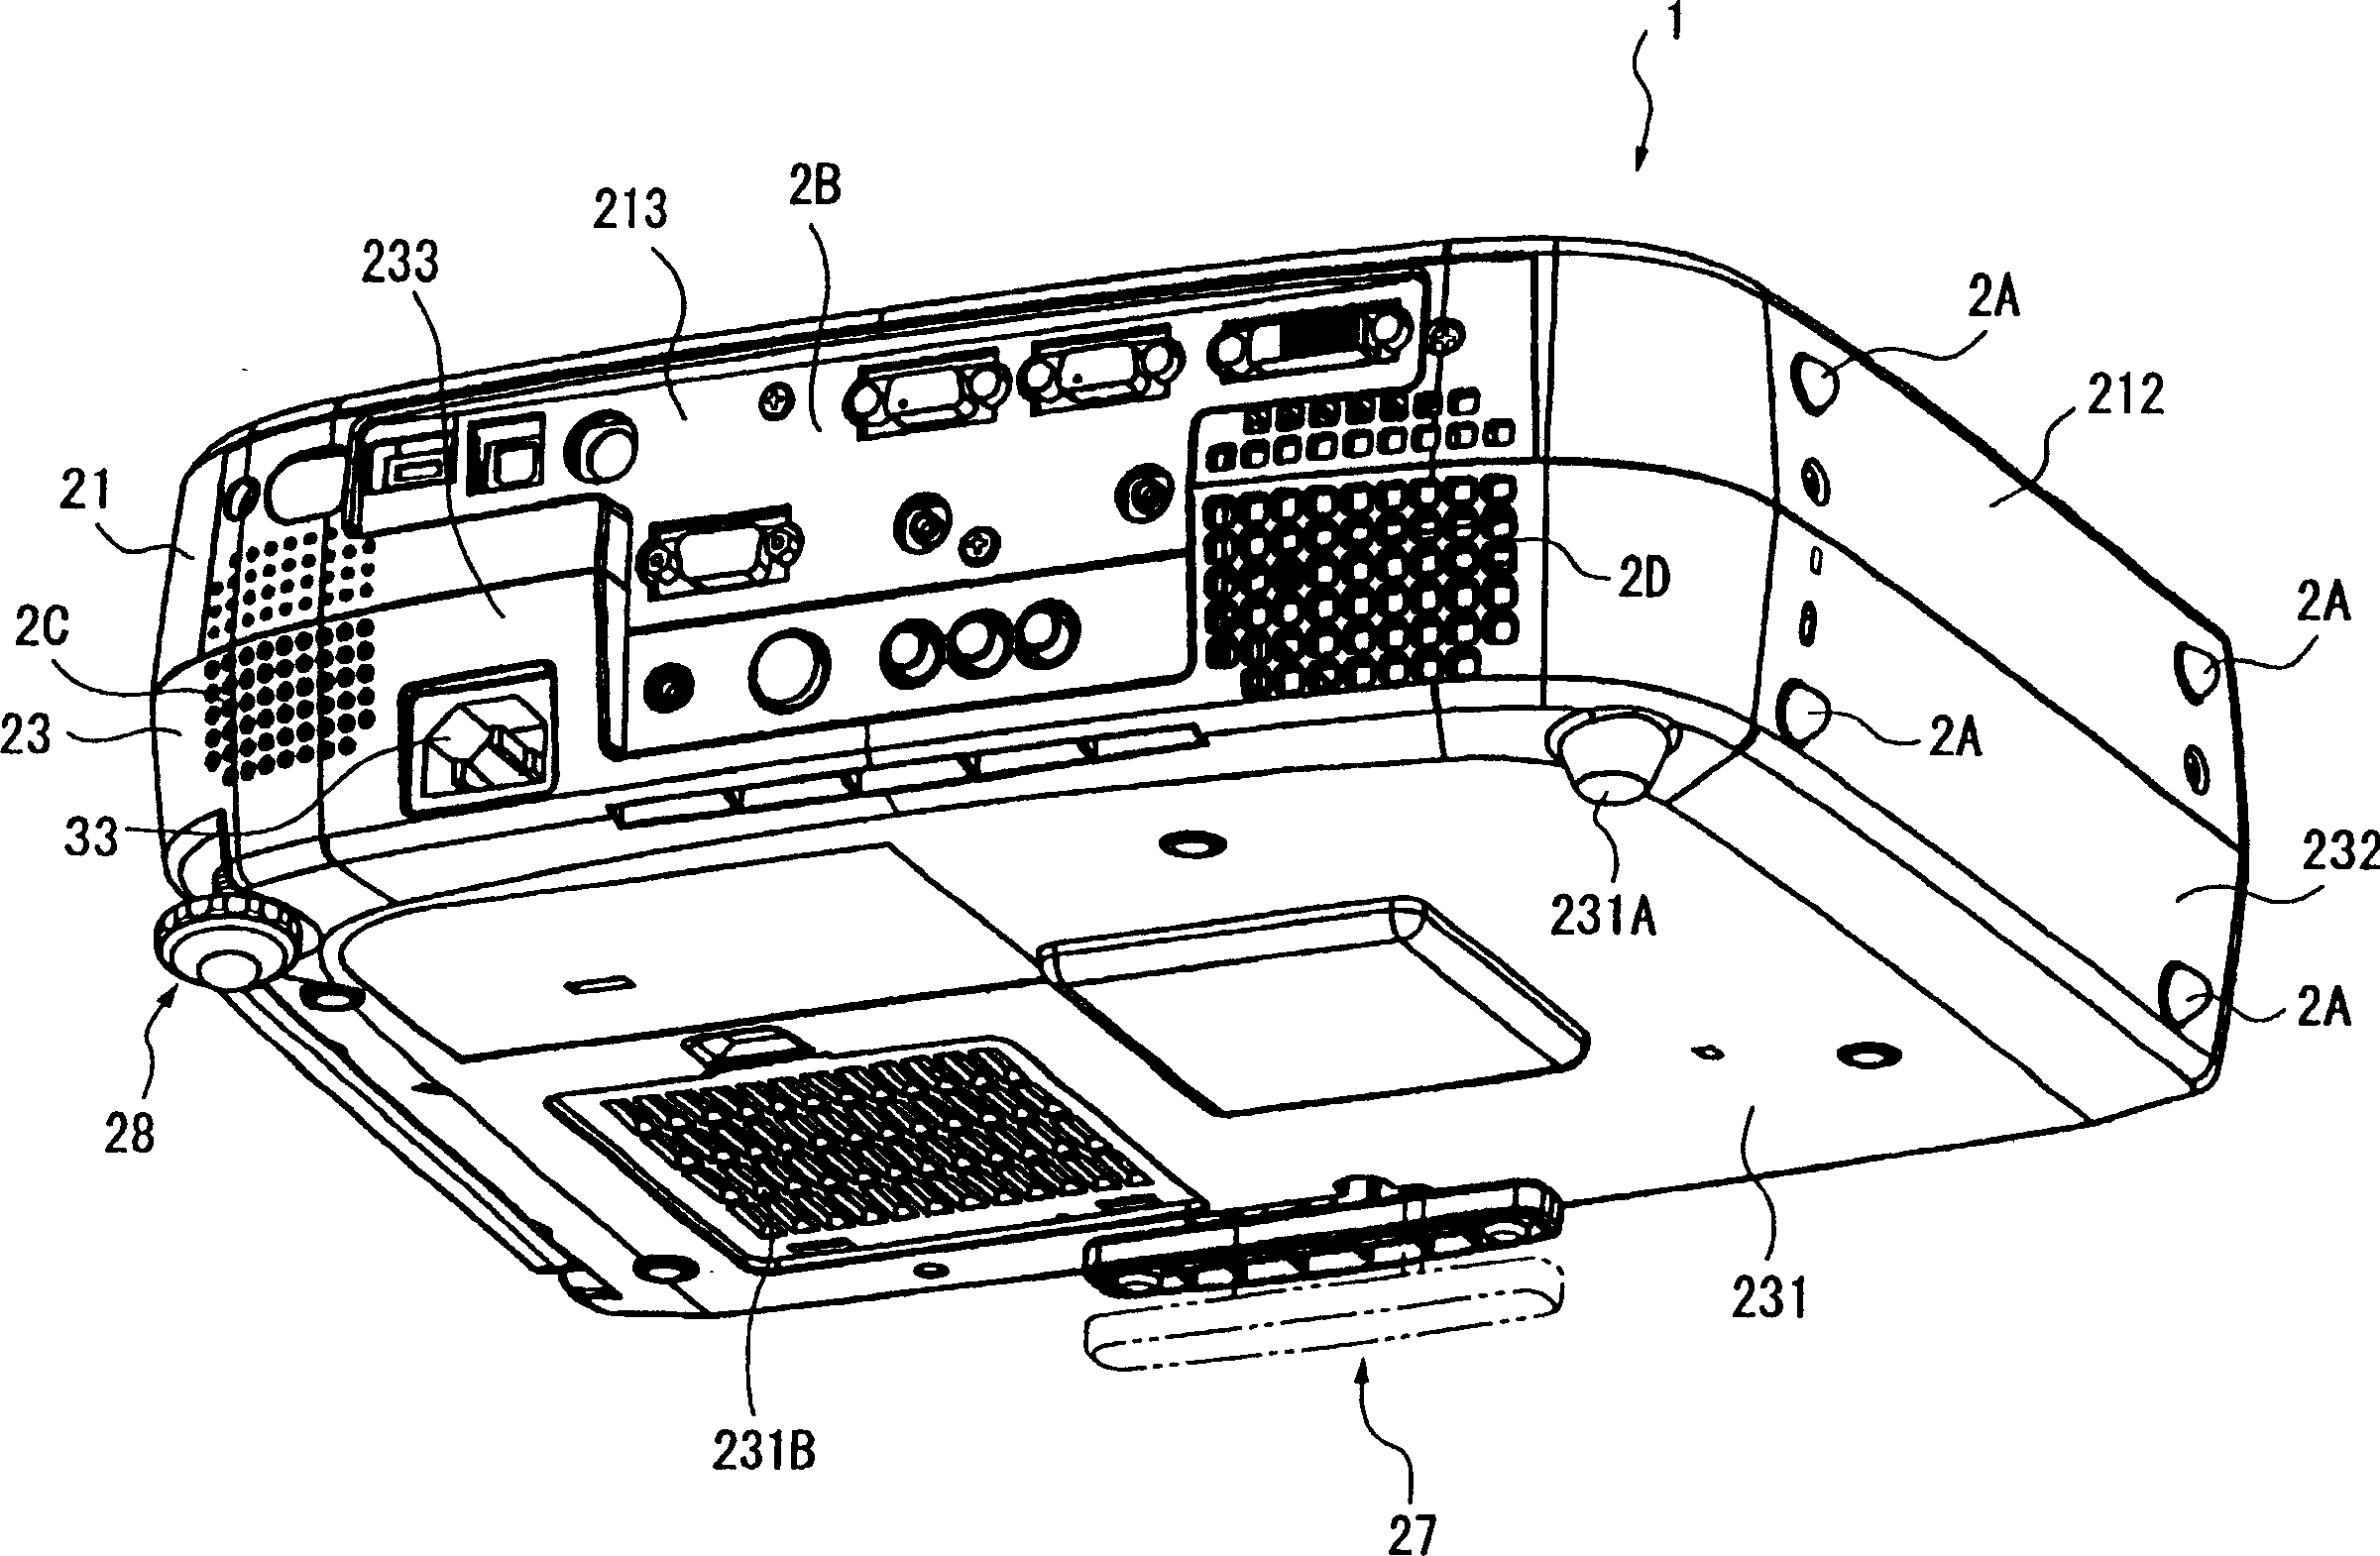 Casing for electronic device and projector having this casing for electronic device